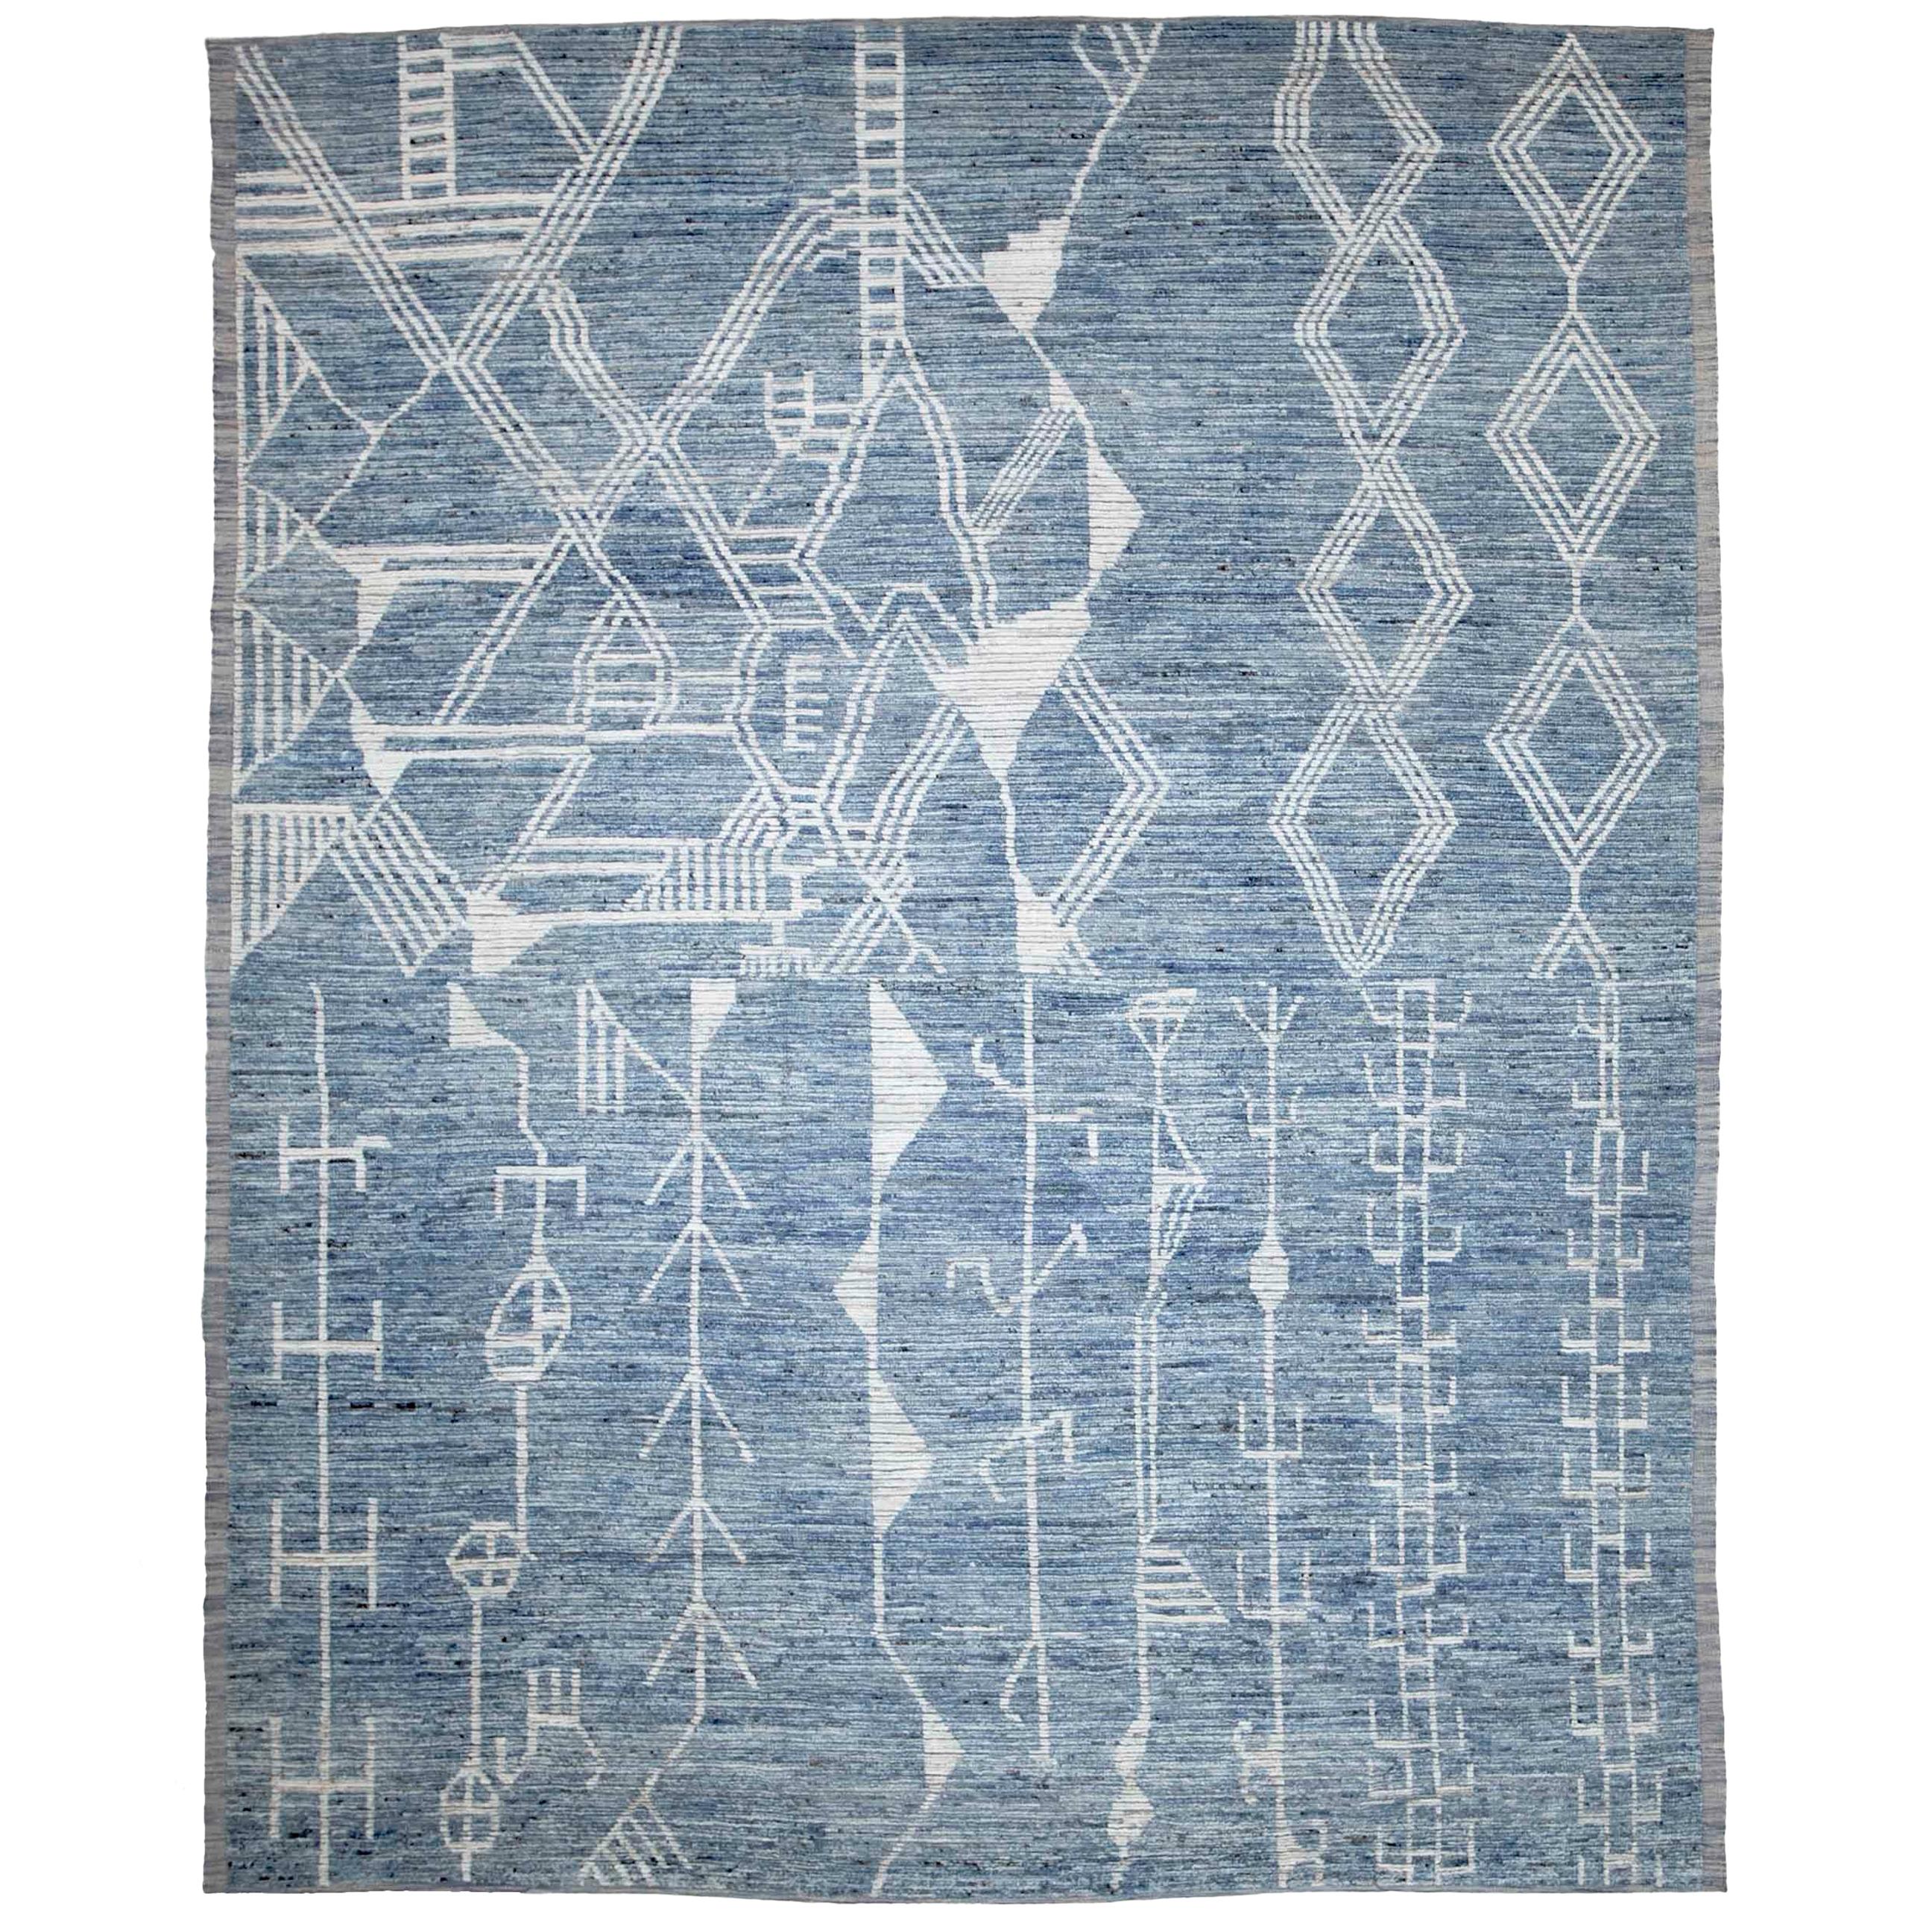 Afghan Rug in Moroccan Design with Ivory Tribal Patterns on Blue Field